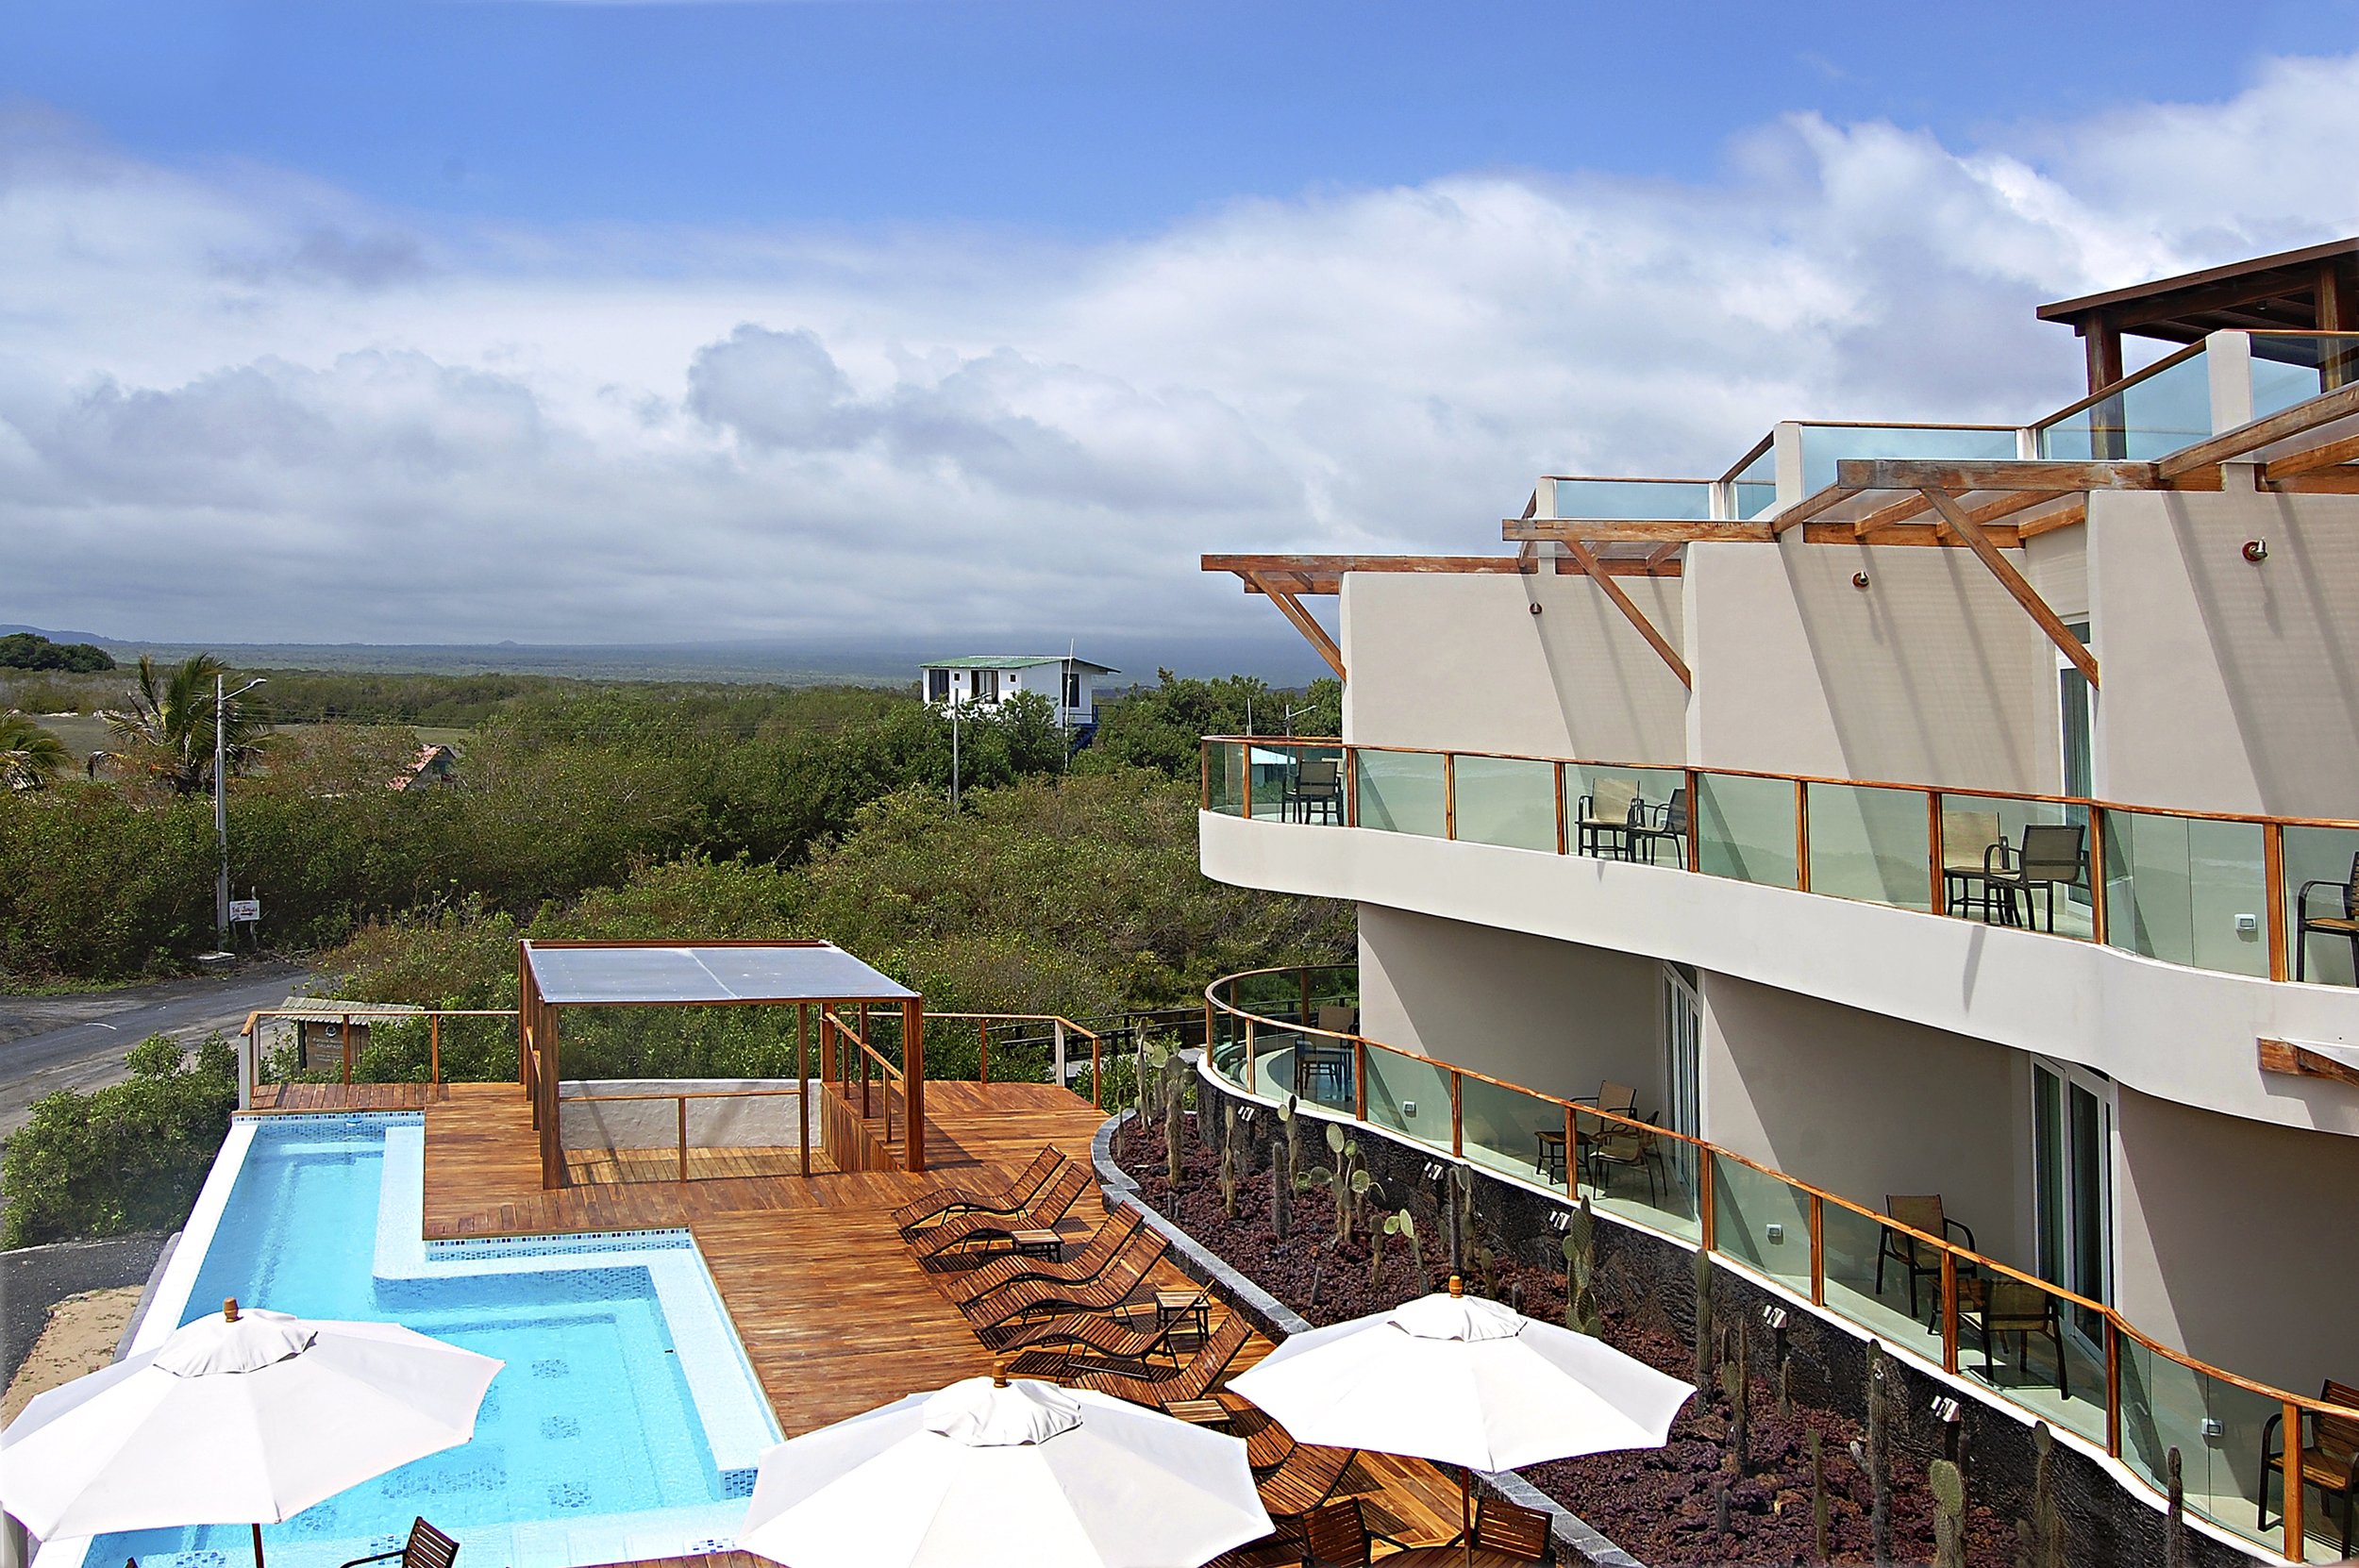 Galapagos Hotels | Iguana Crossing Boutique Hotel